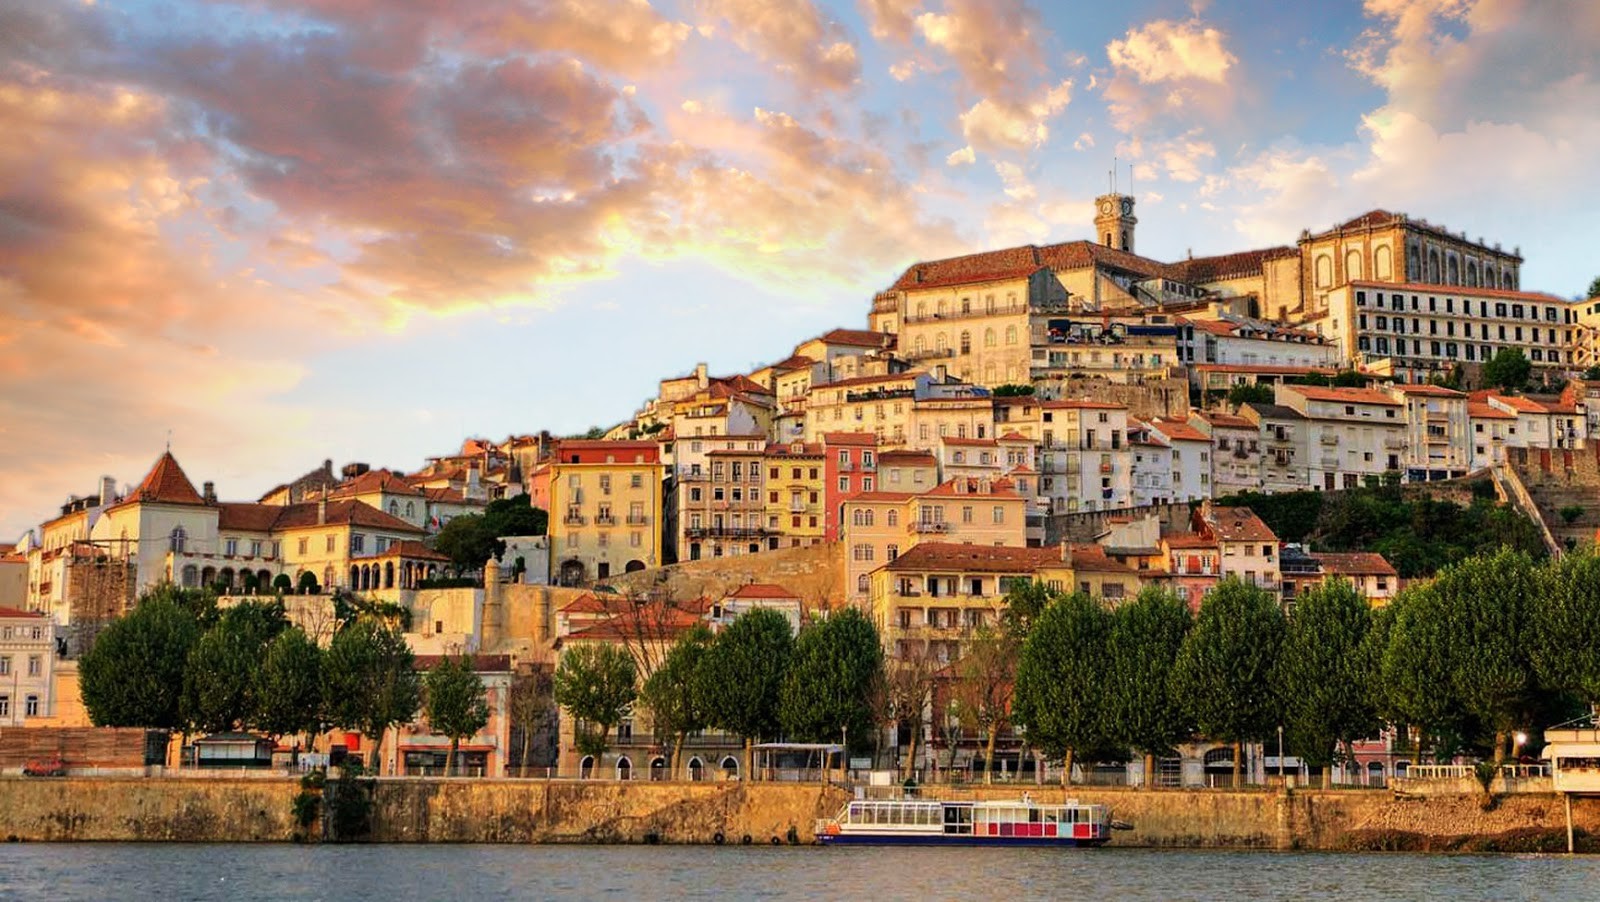 Something new every day in Coimbra | Erasmus experience Coimbra